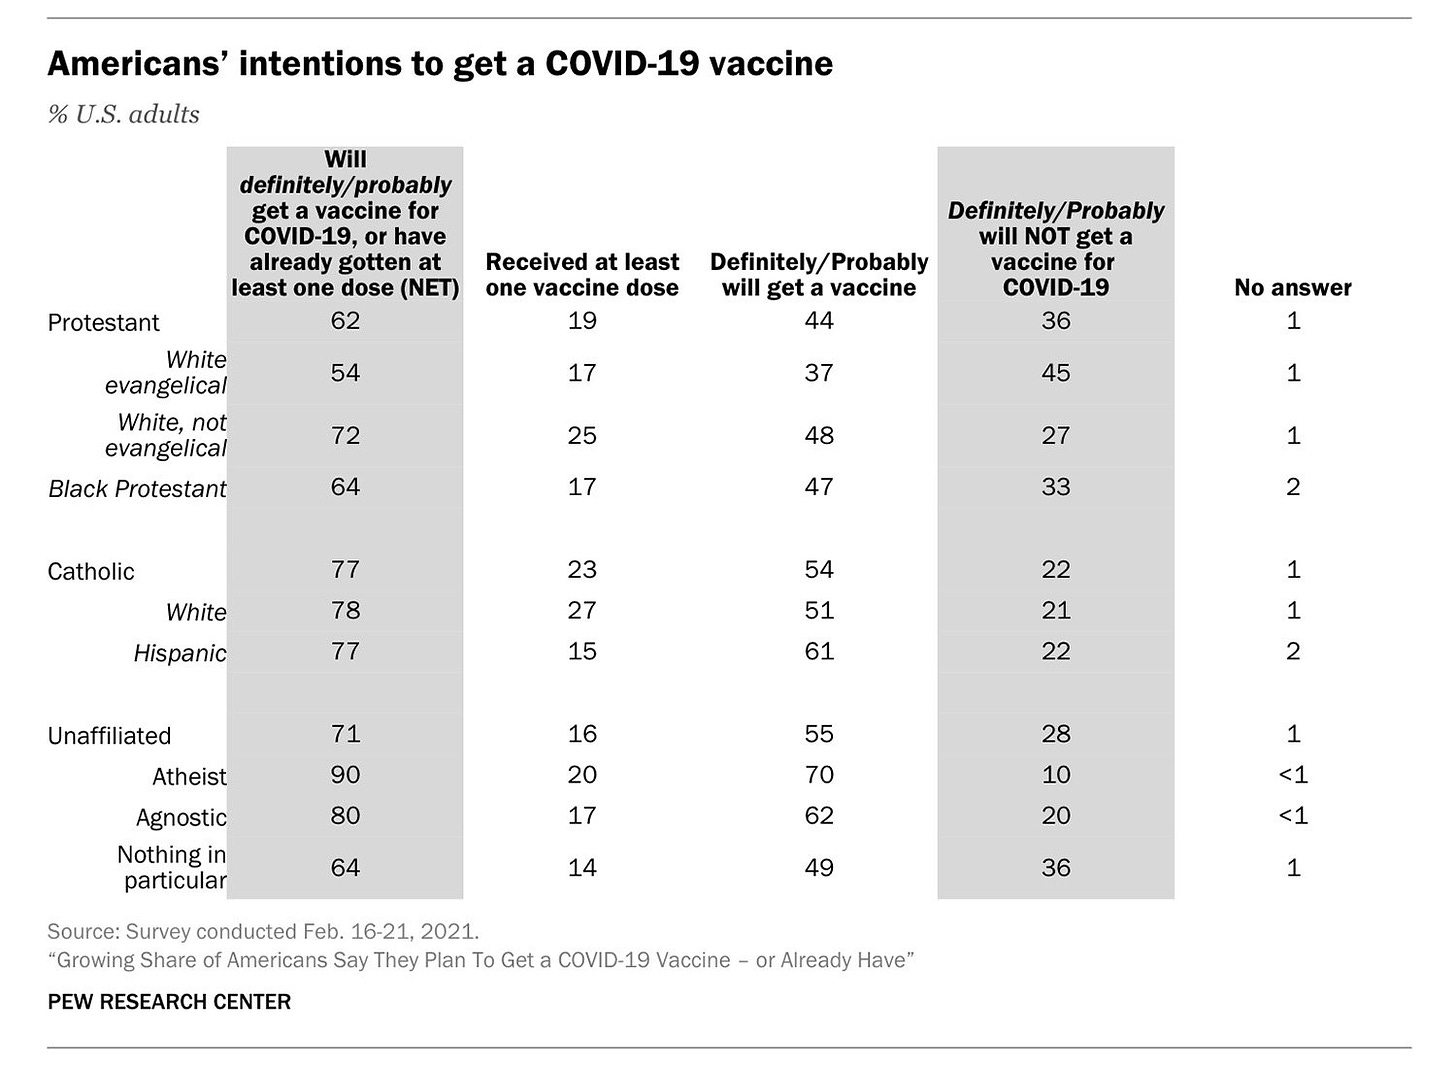 “Americans’ intentions to get a COVID-19 vaccine” Graphic courtesy of Pew Researh Center